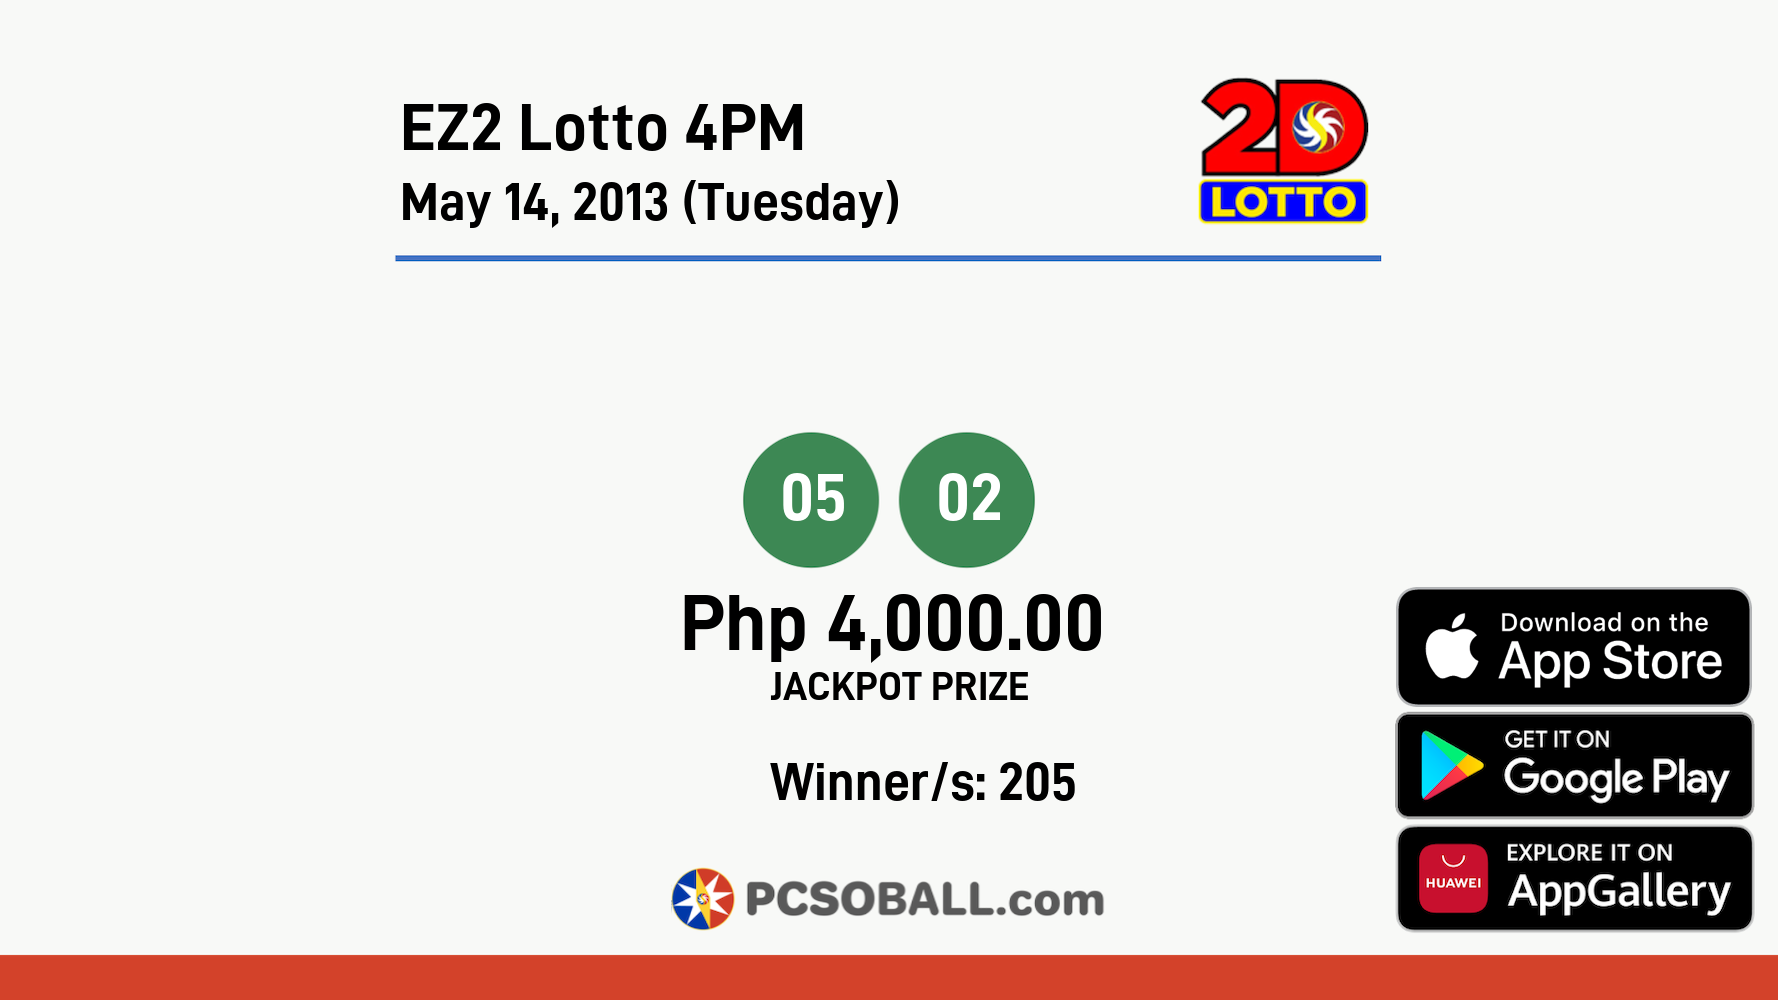 EZ2 Lotto 4PM May 14, 2013 (Tuesday) Result